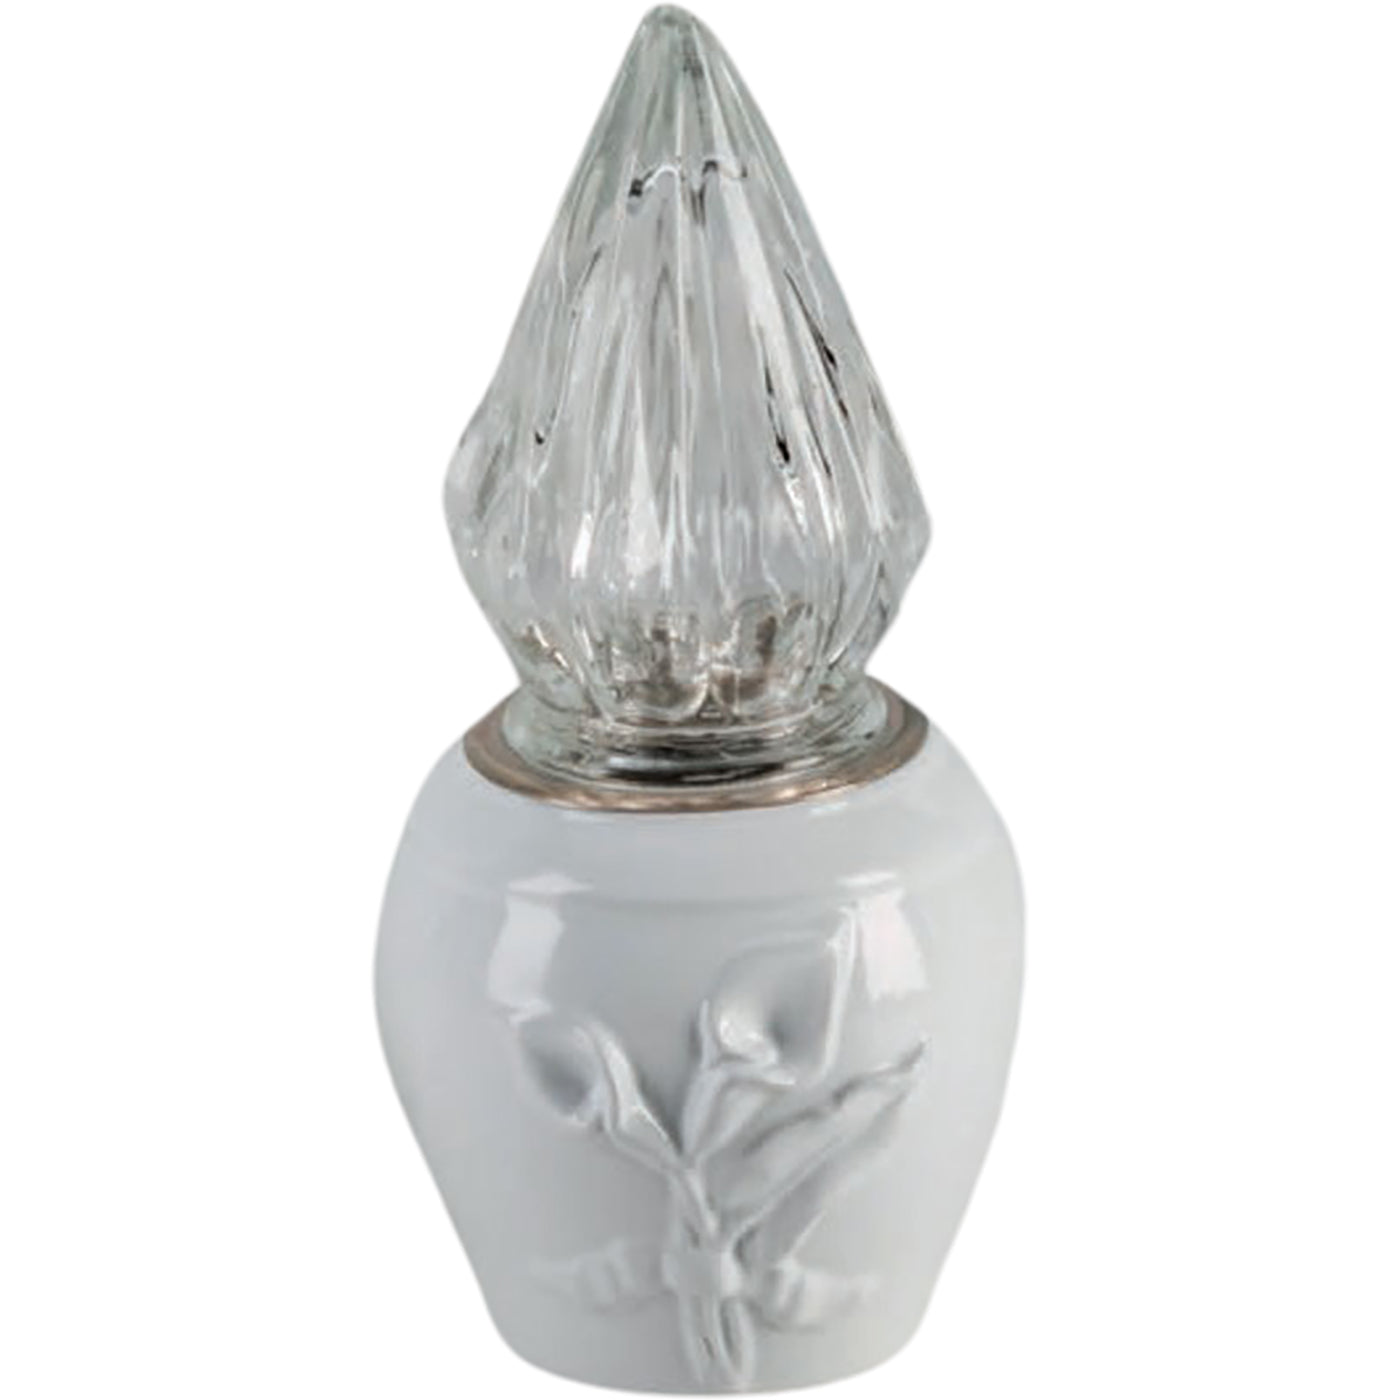 Grave light Calla 10x10cm - 3.9x3.9in In white porcelain, wall attached CAL164P